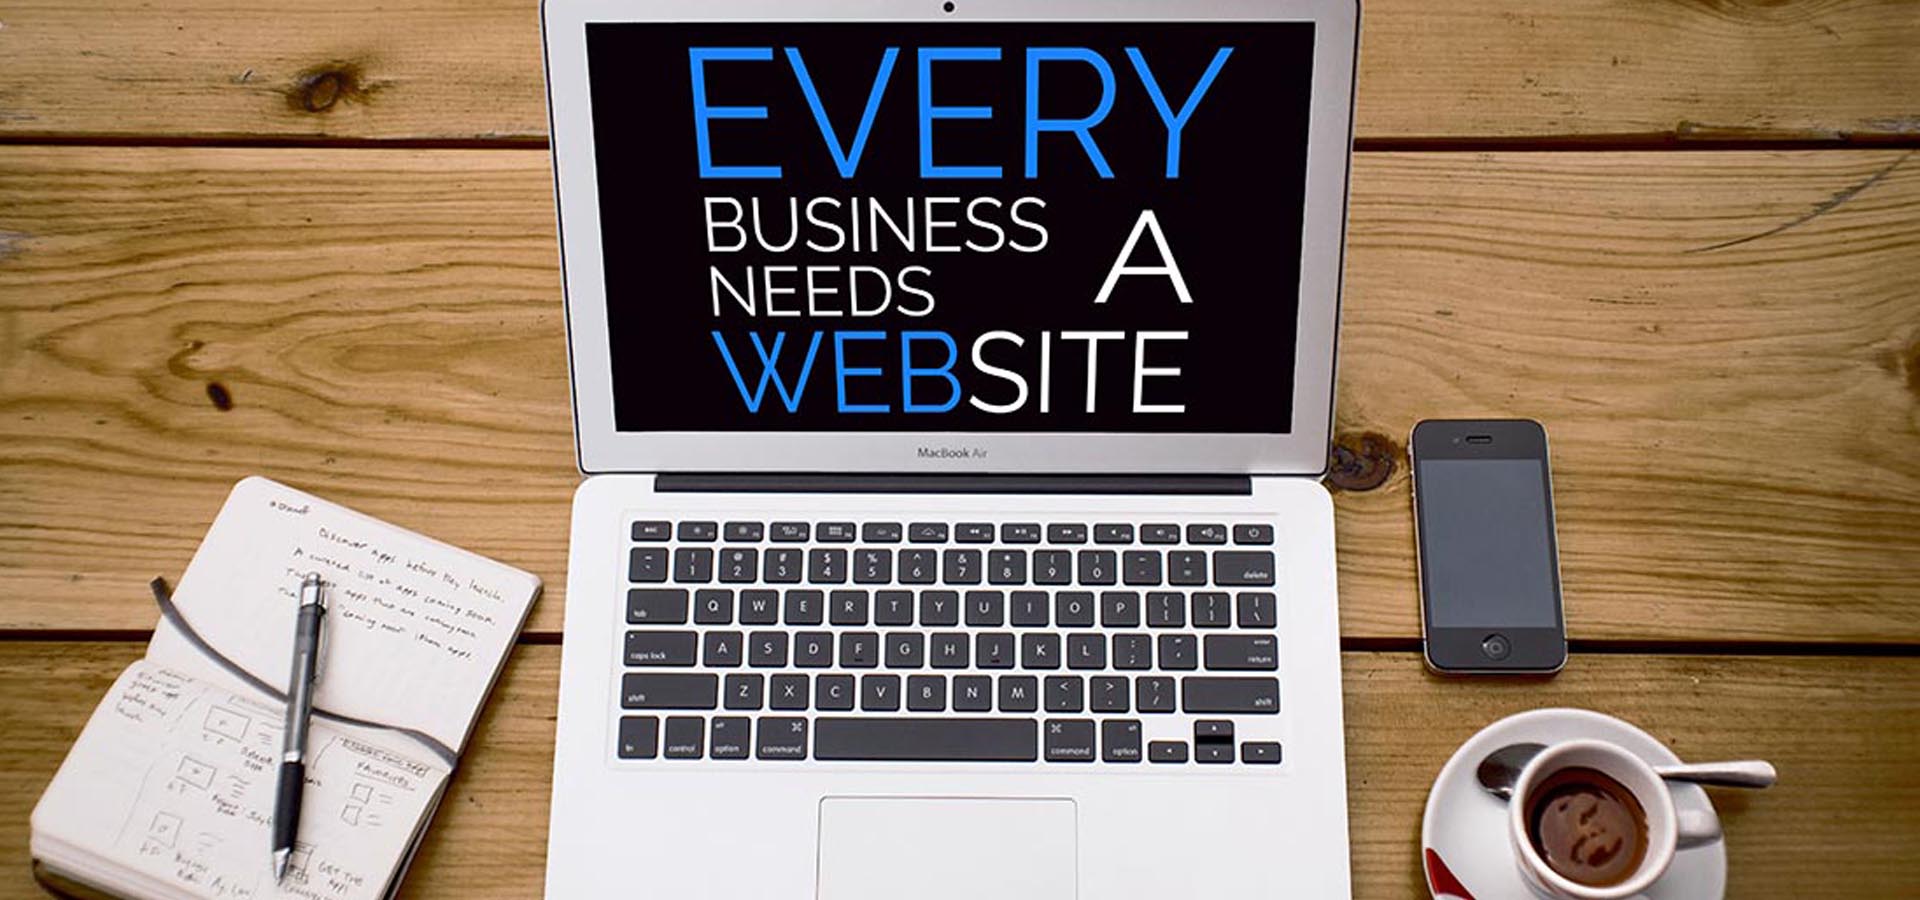 Why Do You Need A Website For Your Business?